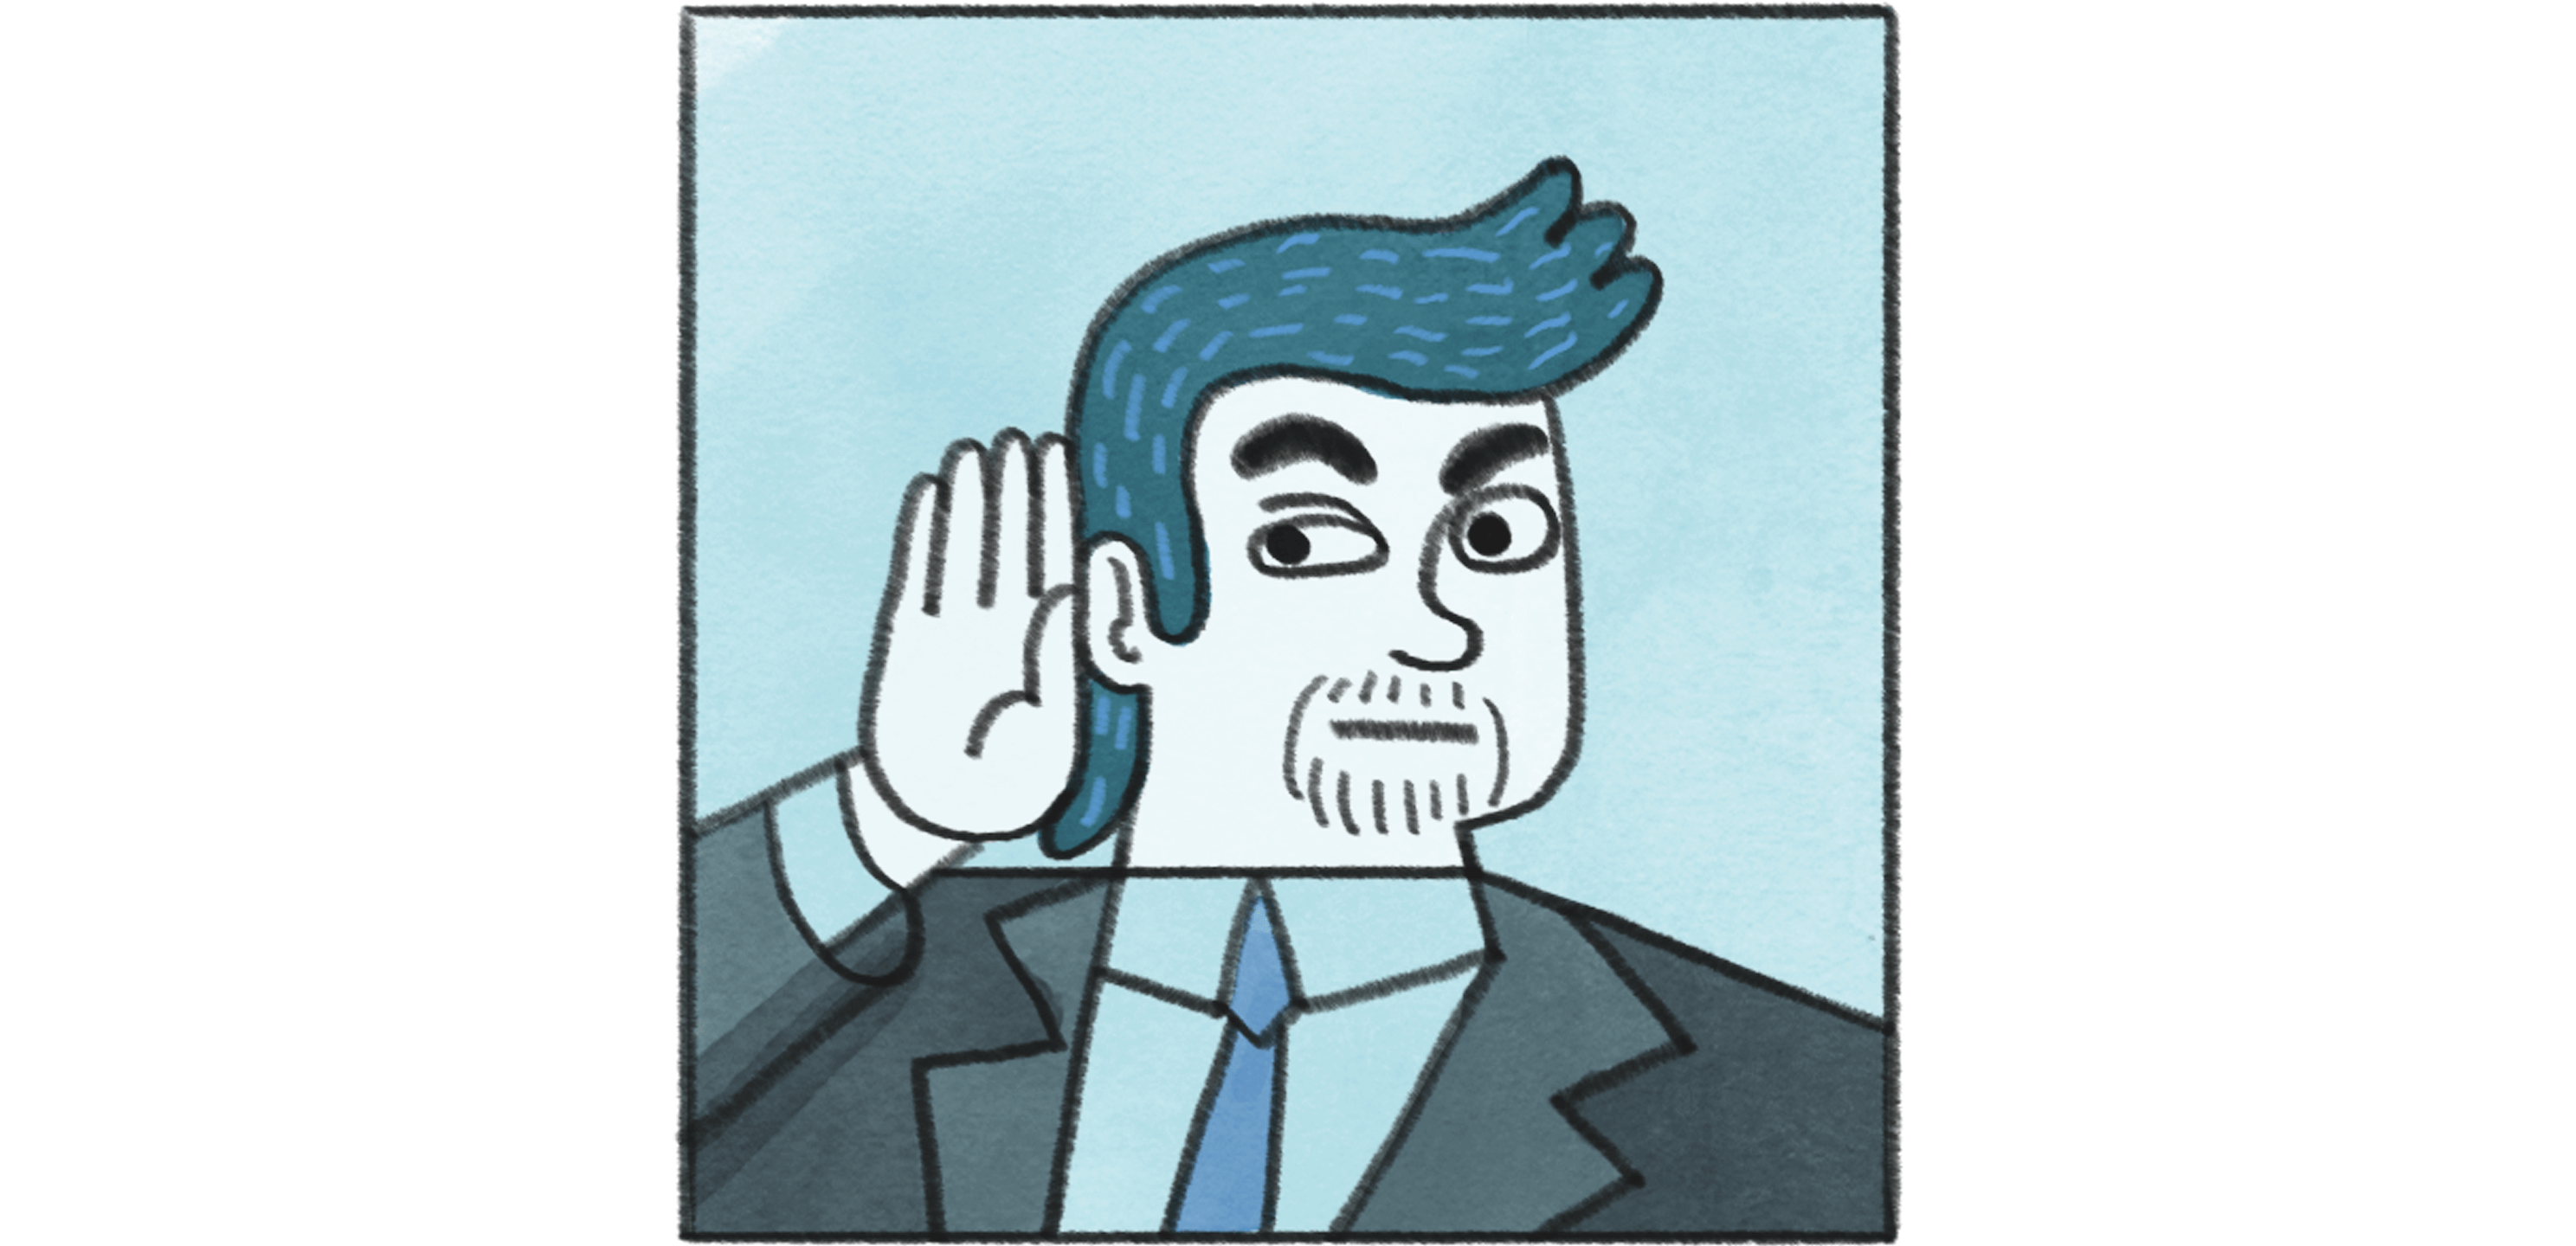 A cutout portion of the cover of the blog showing a business man holding up his hand to his ear to listen better.